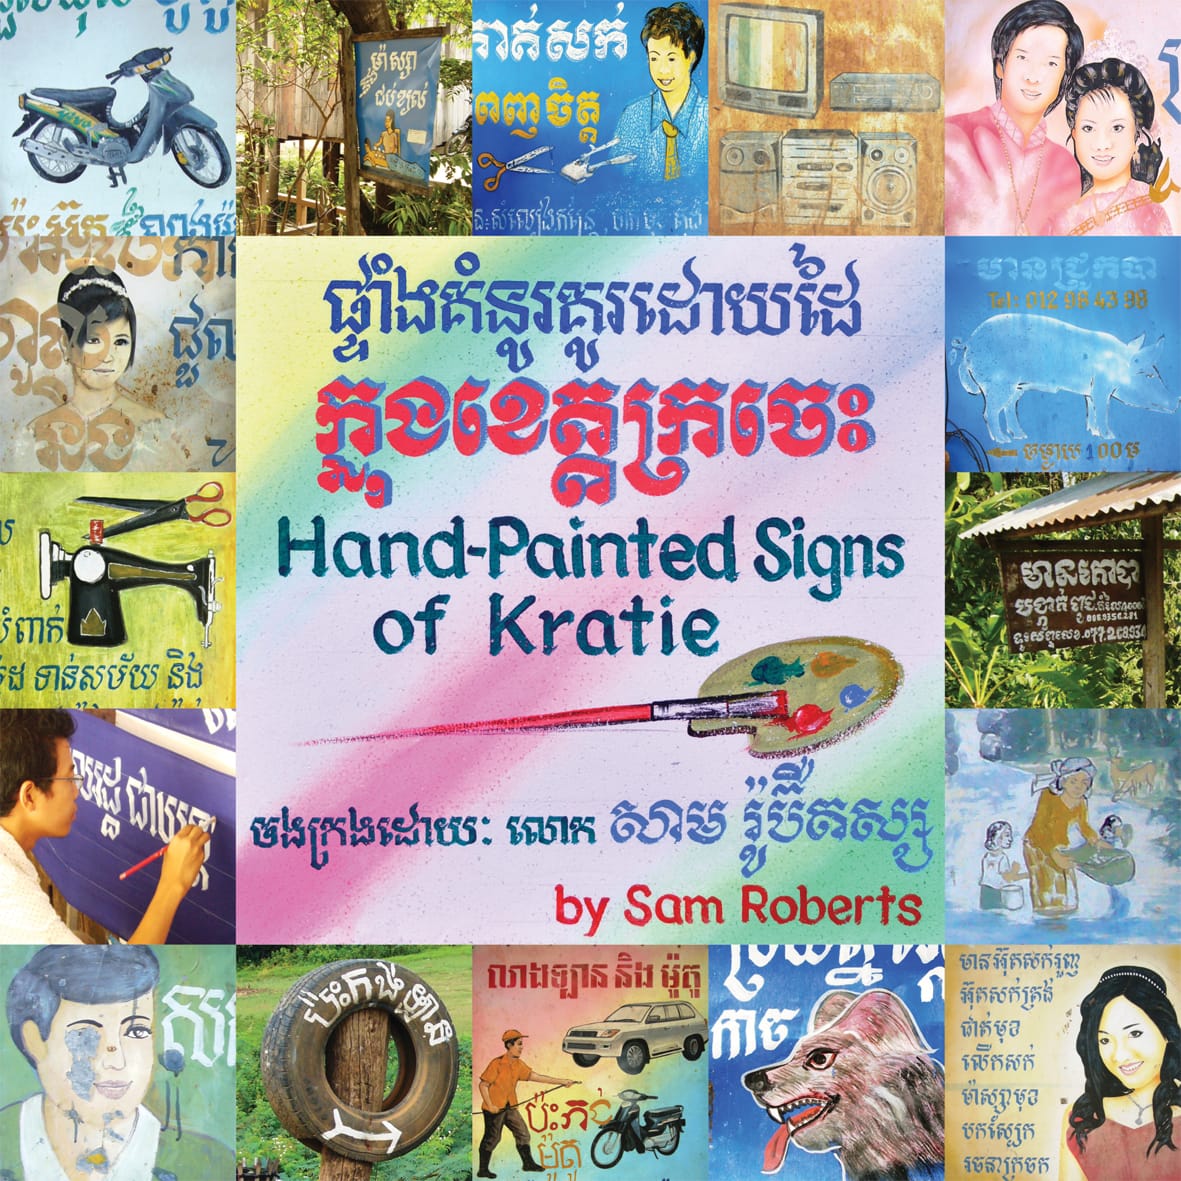 Cover of a book with a central panel giving the title in English and Khmer surrounded by thumbnail photos of hand-painted signs.